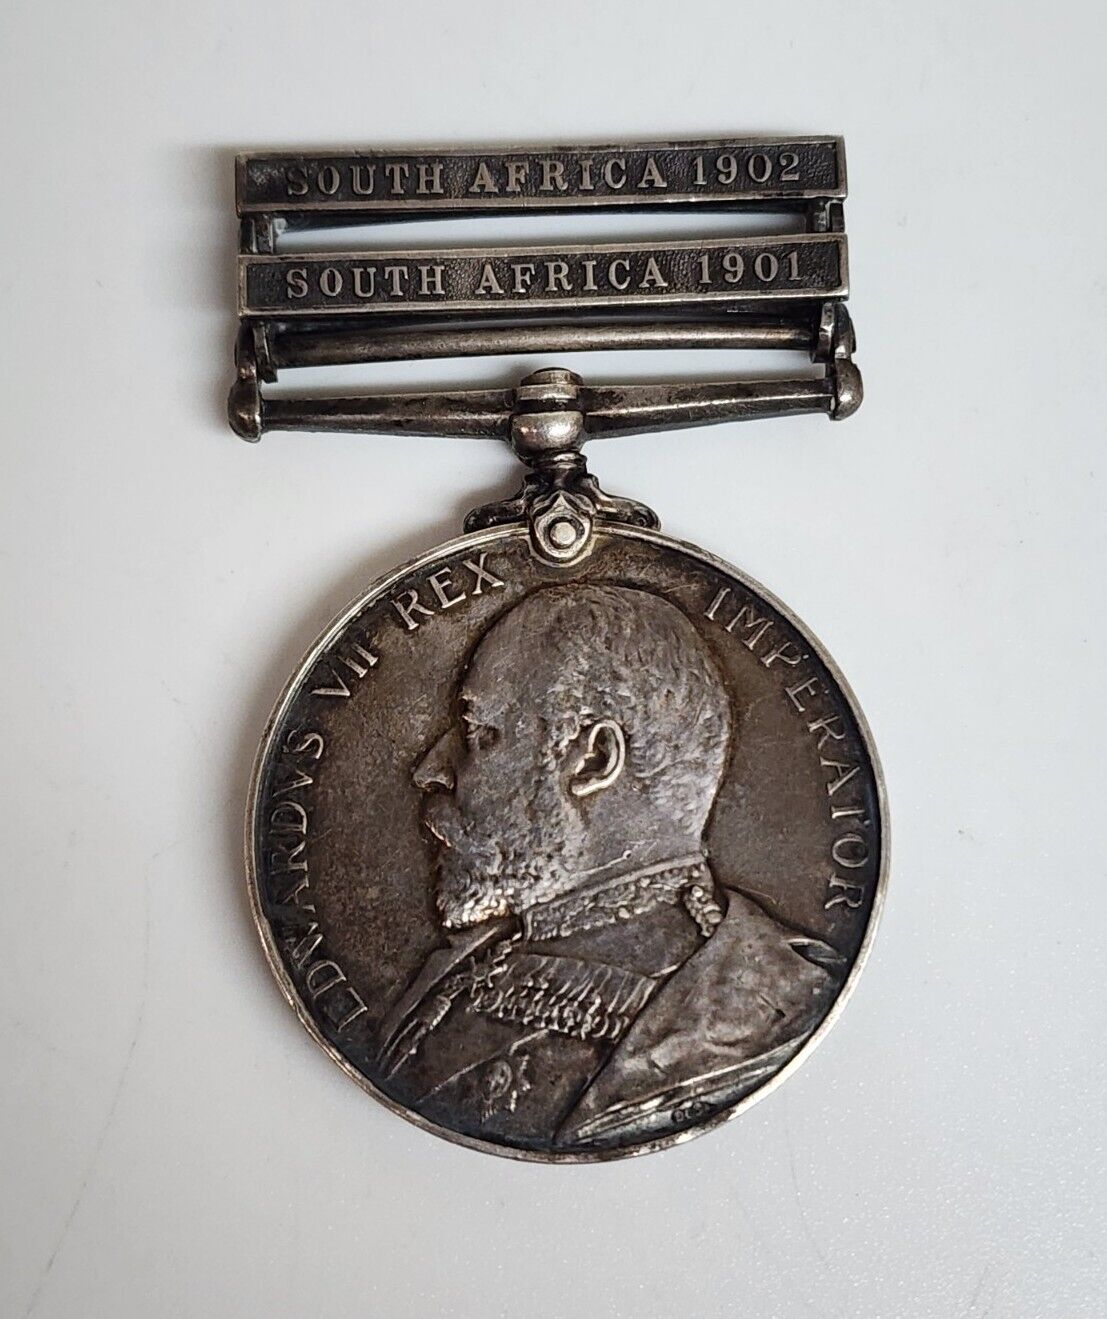 King\'s South Africa Silver Medal Named Private C. Sullivan 4th Hussars